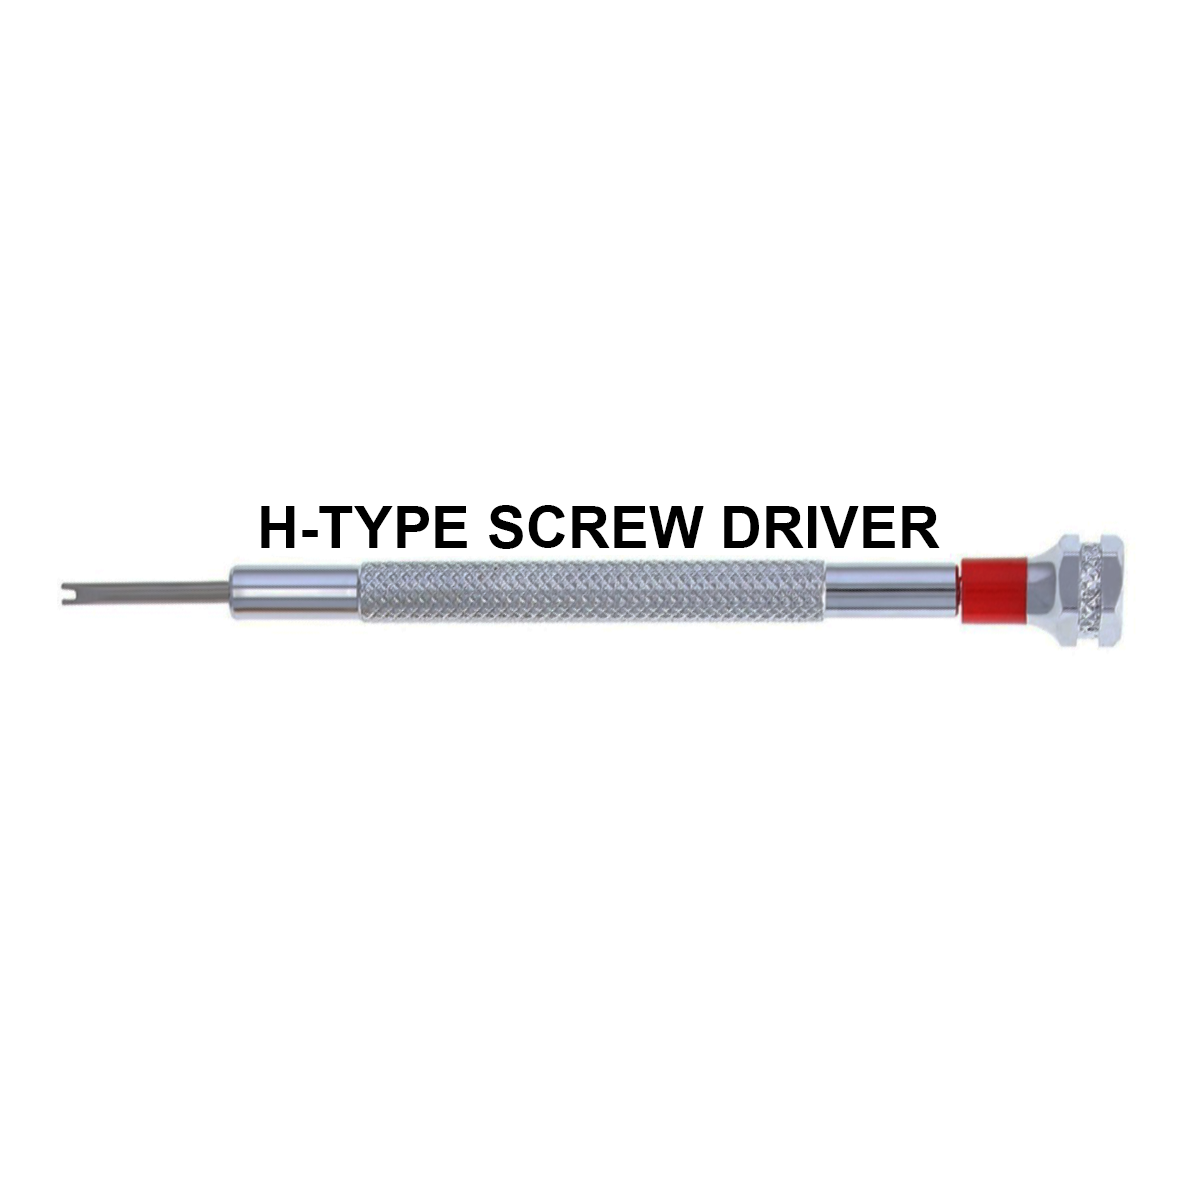 [HLSTLS-01] H-TYPE SCREW DRIVER FOR "HUBLOT" WATCHES